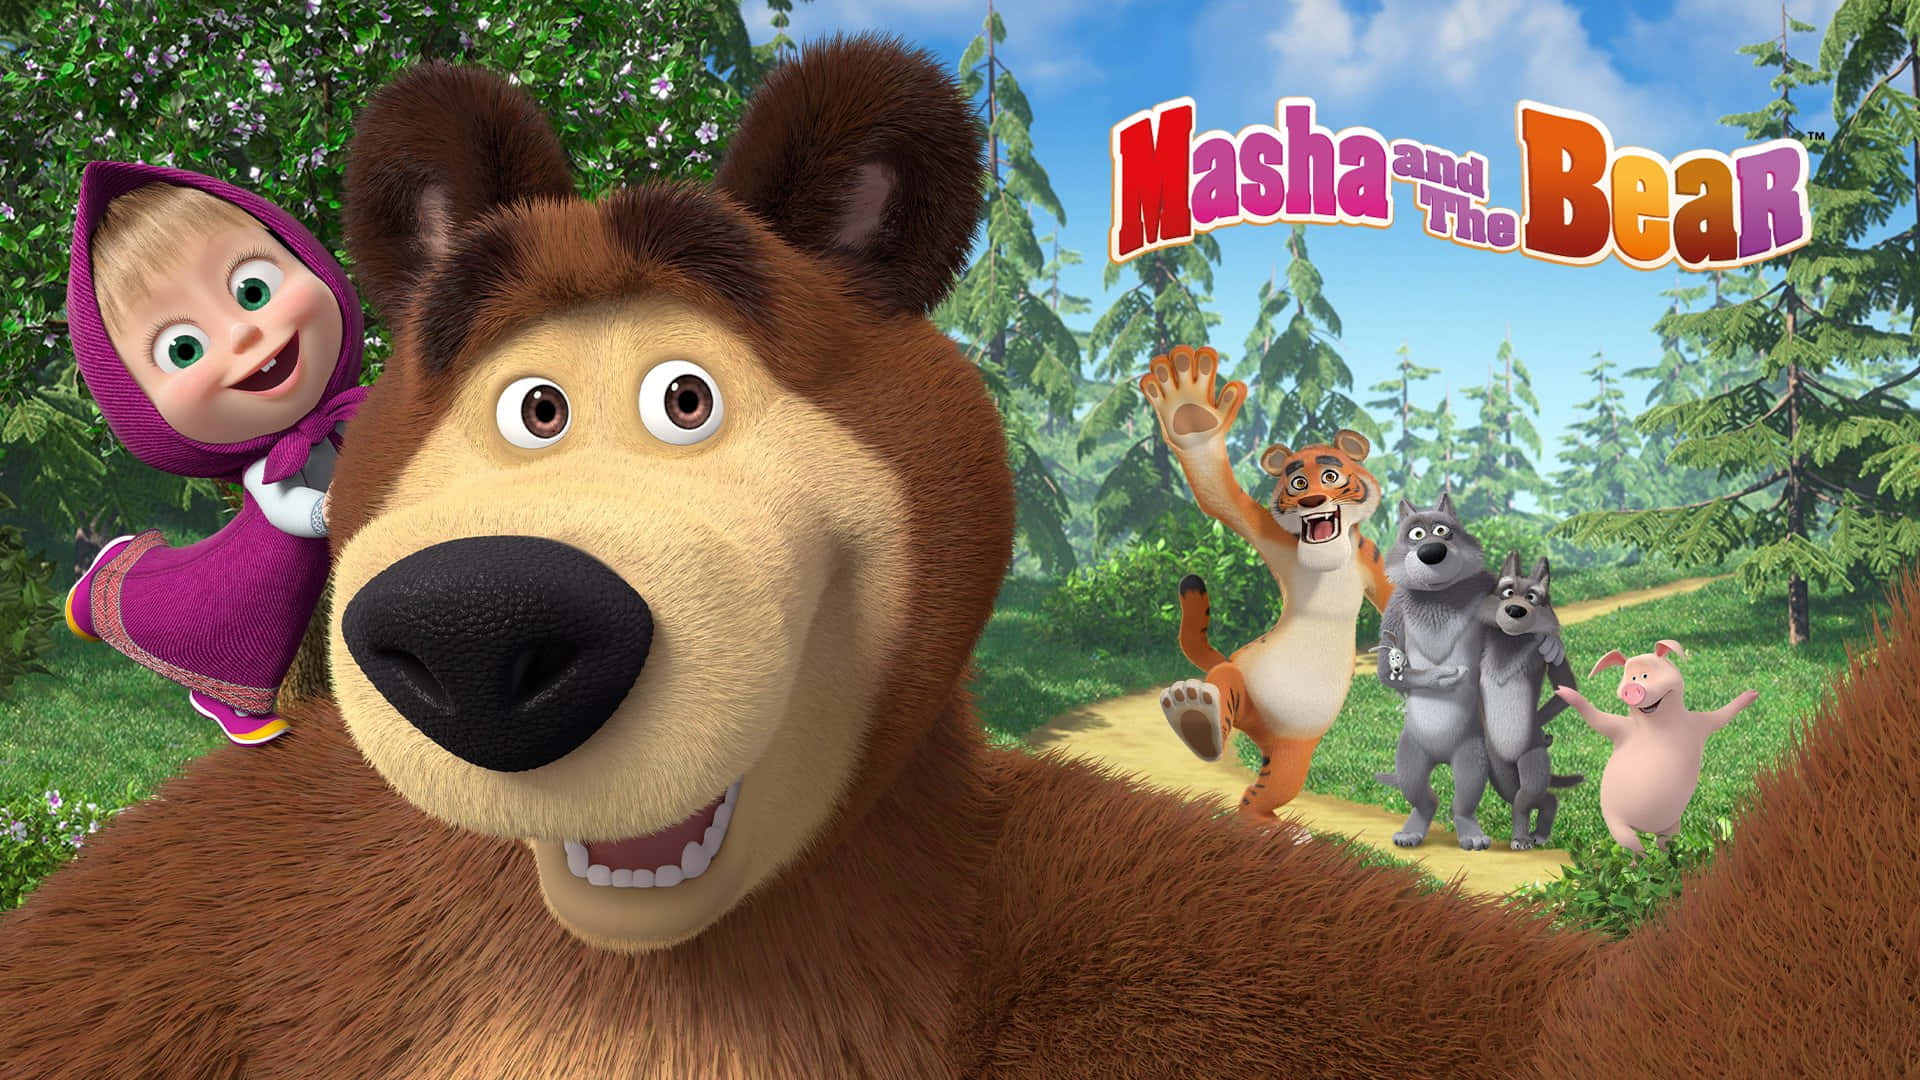 Masha and the Bear exploring the forest together